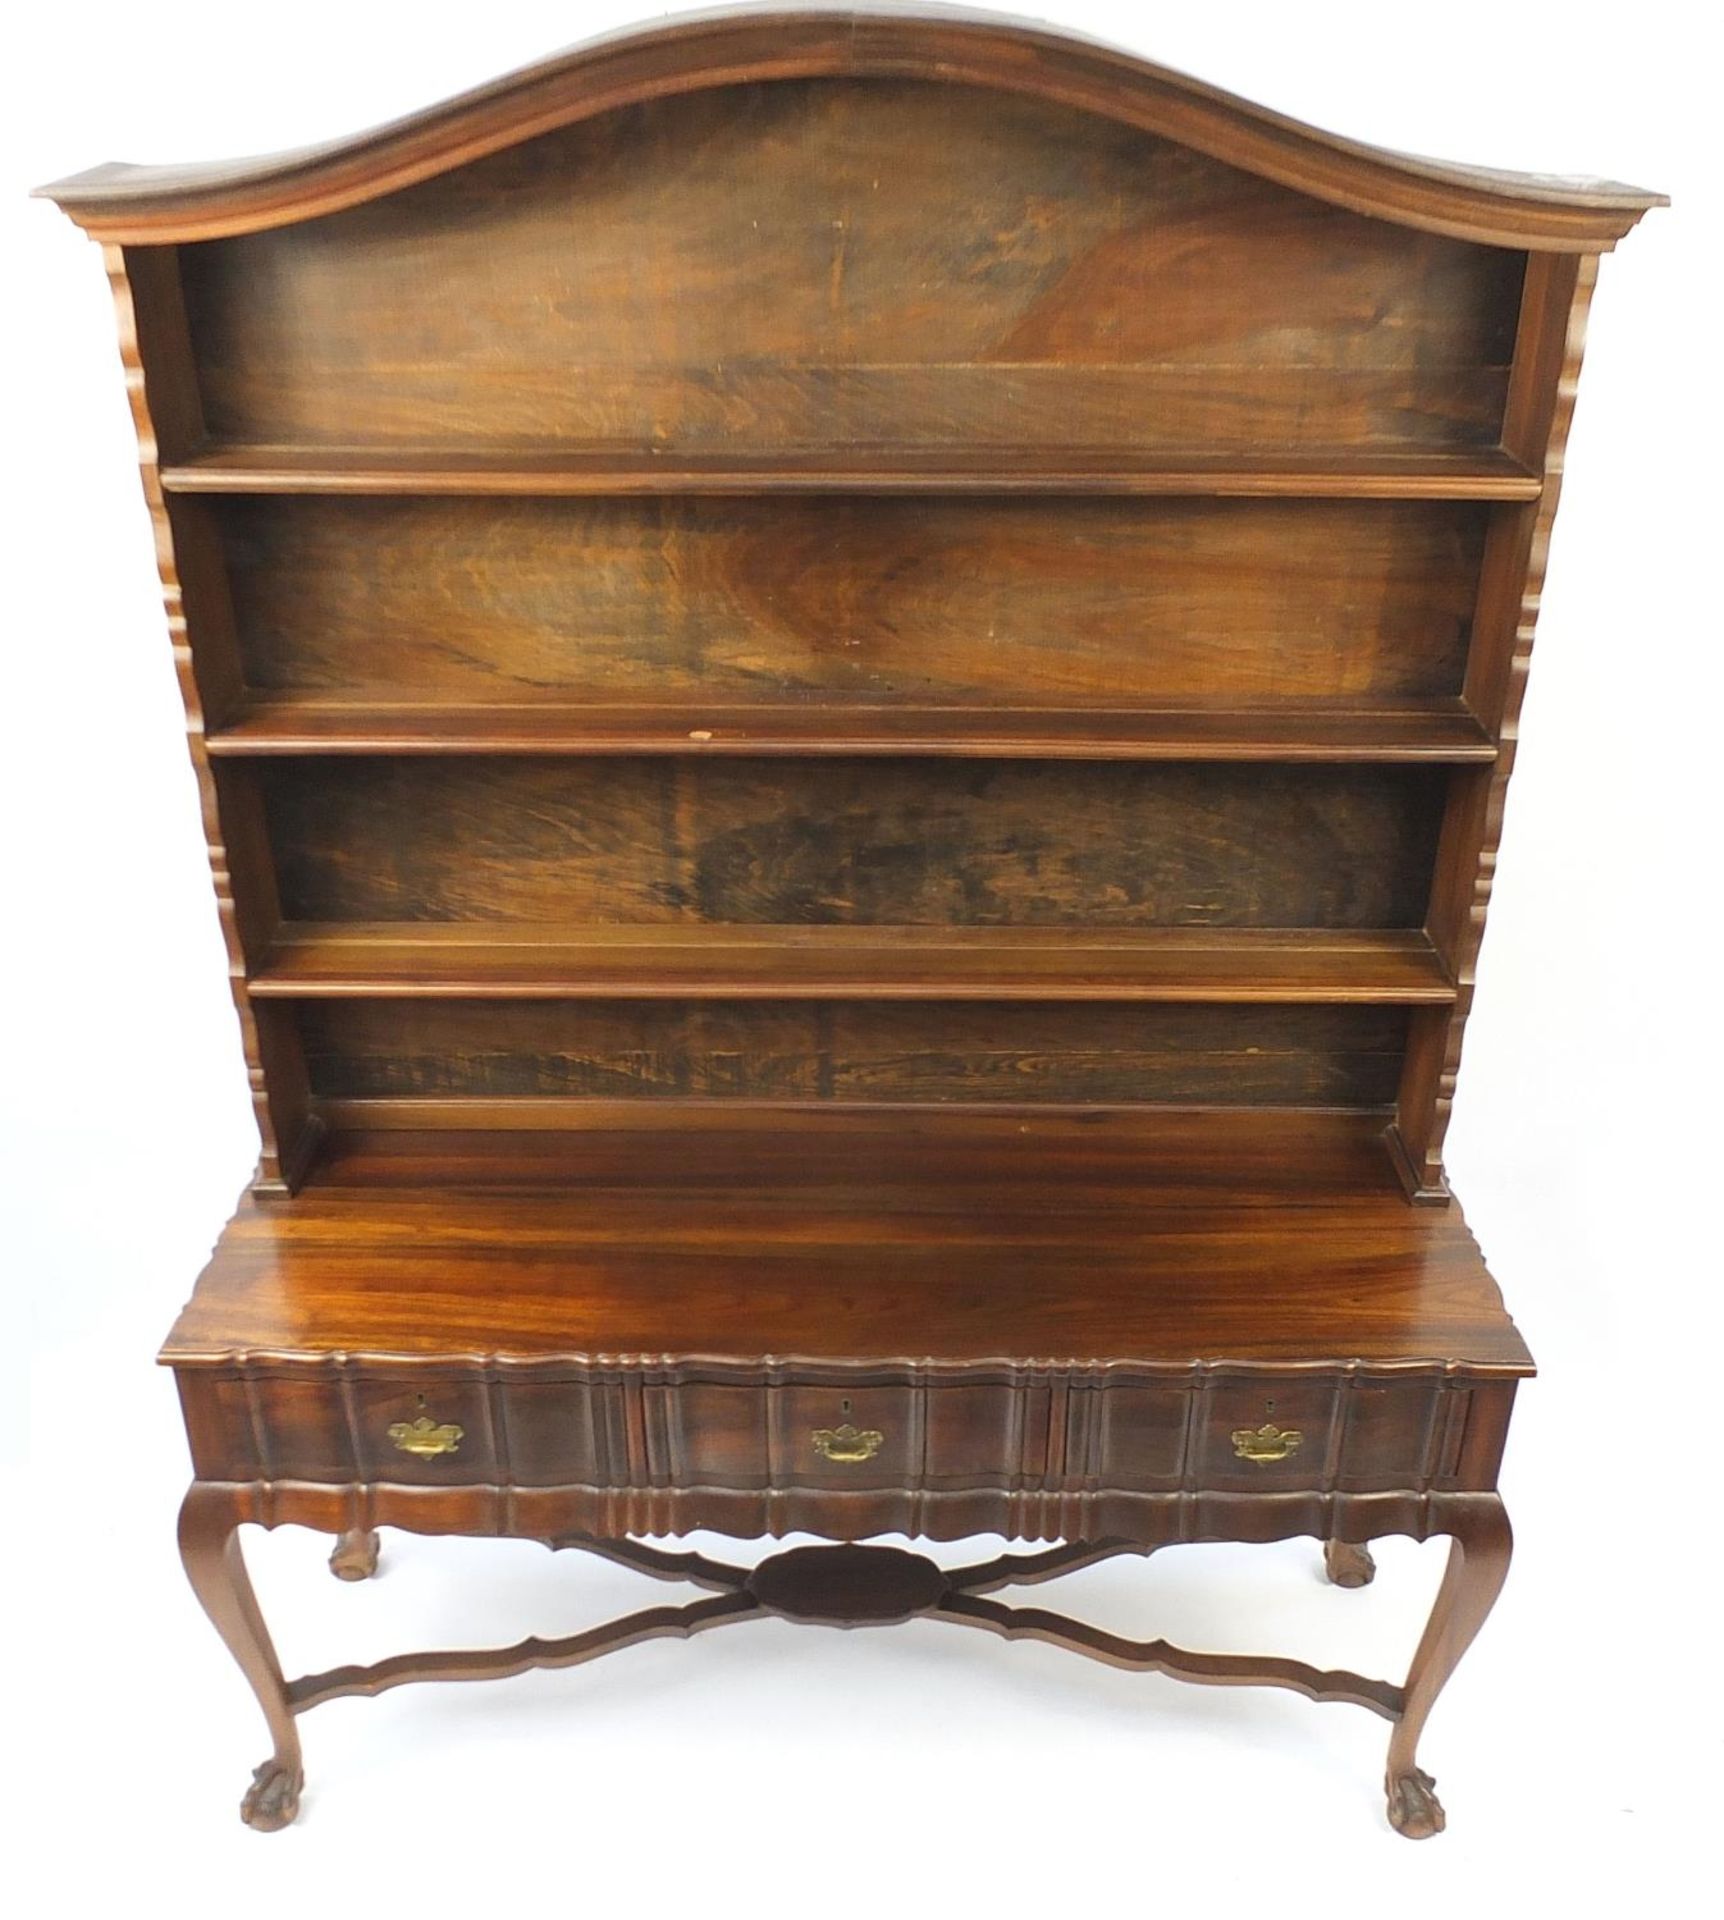 Jonker of Knysna, South African stinkwood dresser with open plate rack above three drawers, on - Image 2 of 3